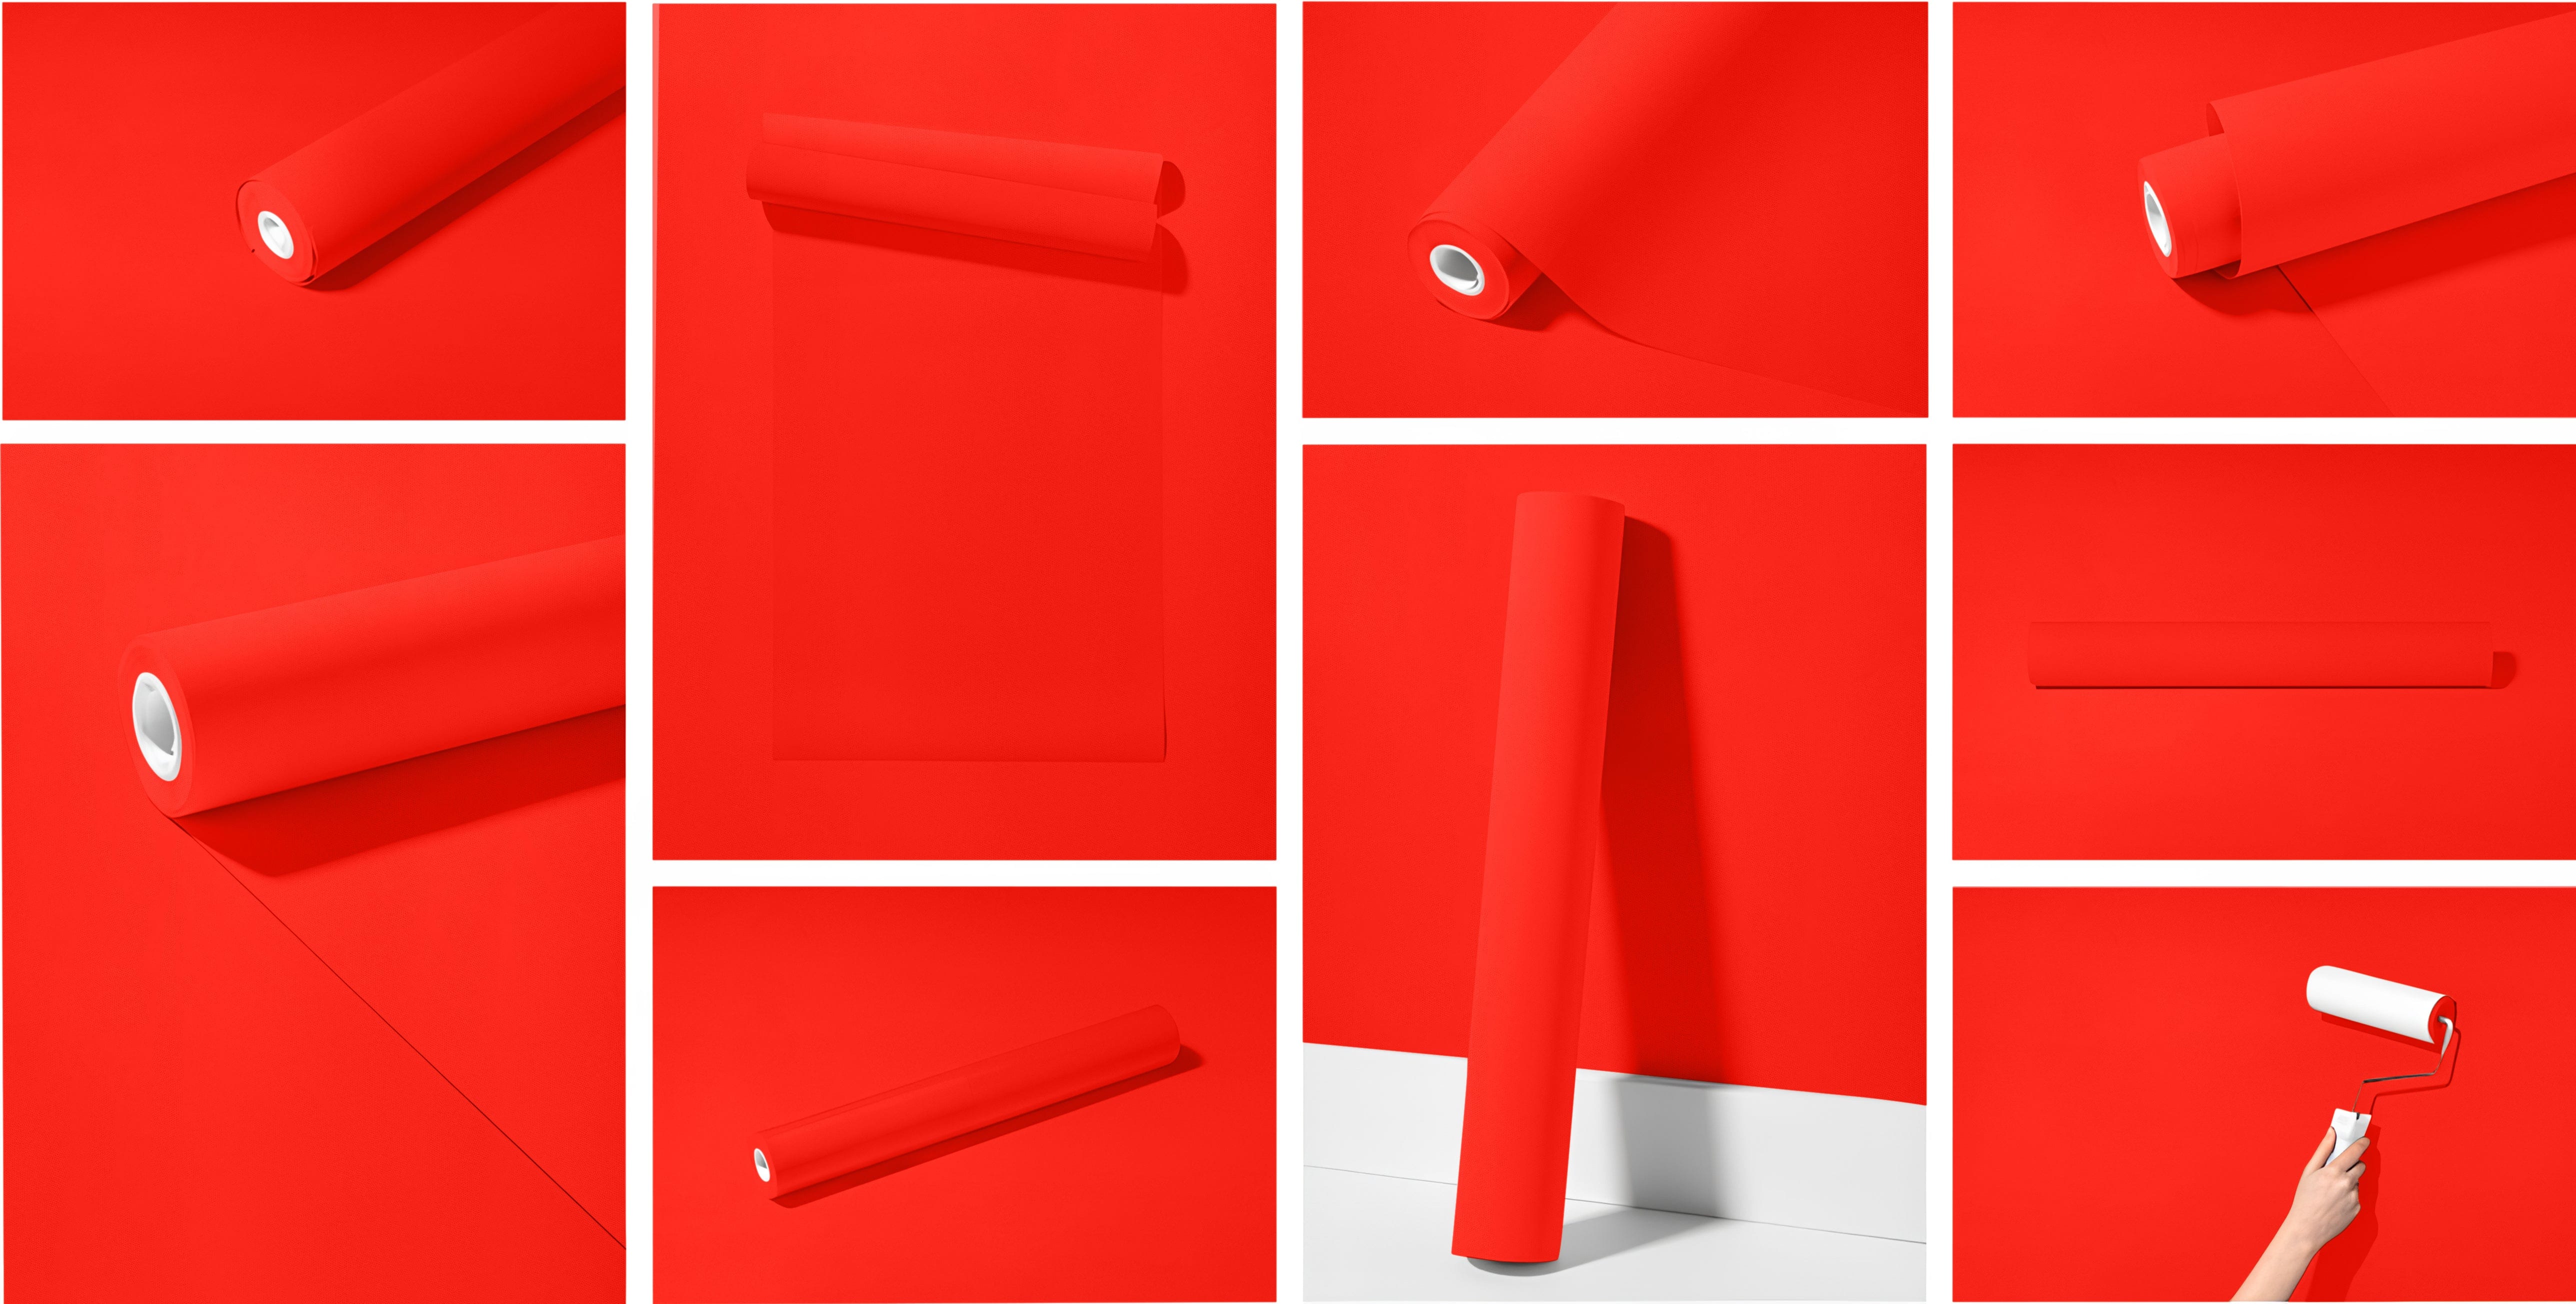 Peel & Stick Removable Re-usable Paint - Color RAL 3024 Luminous Red - offRAL™ - RALRAW LLC, USA